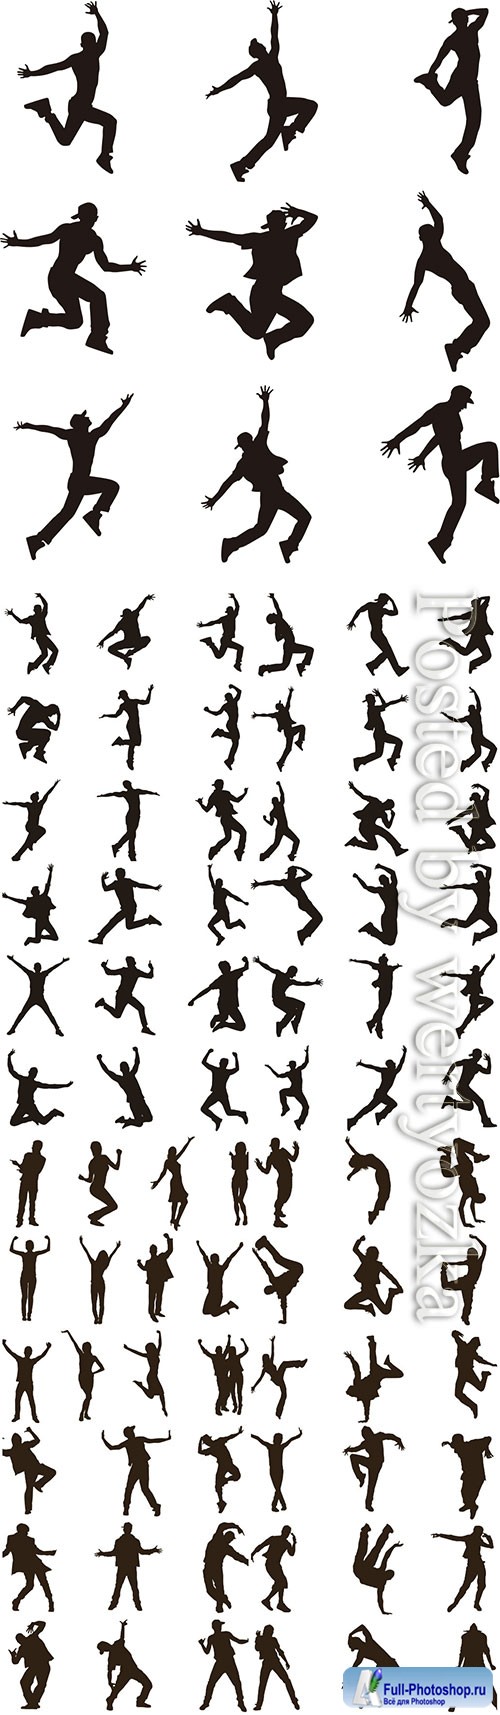 Happy people vector silhouettes